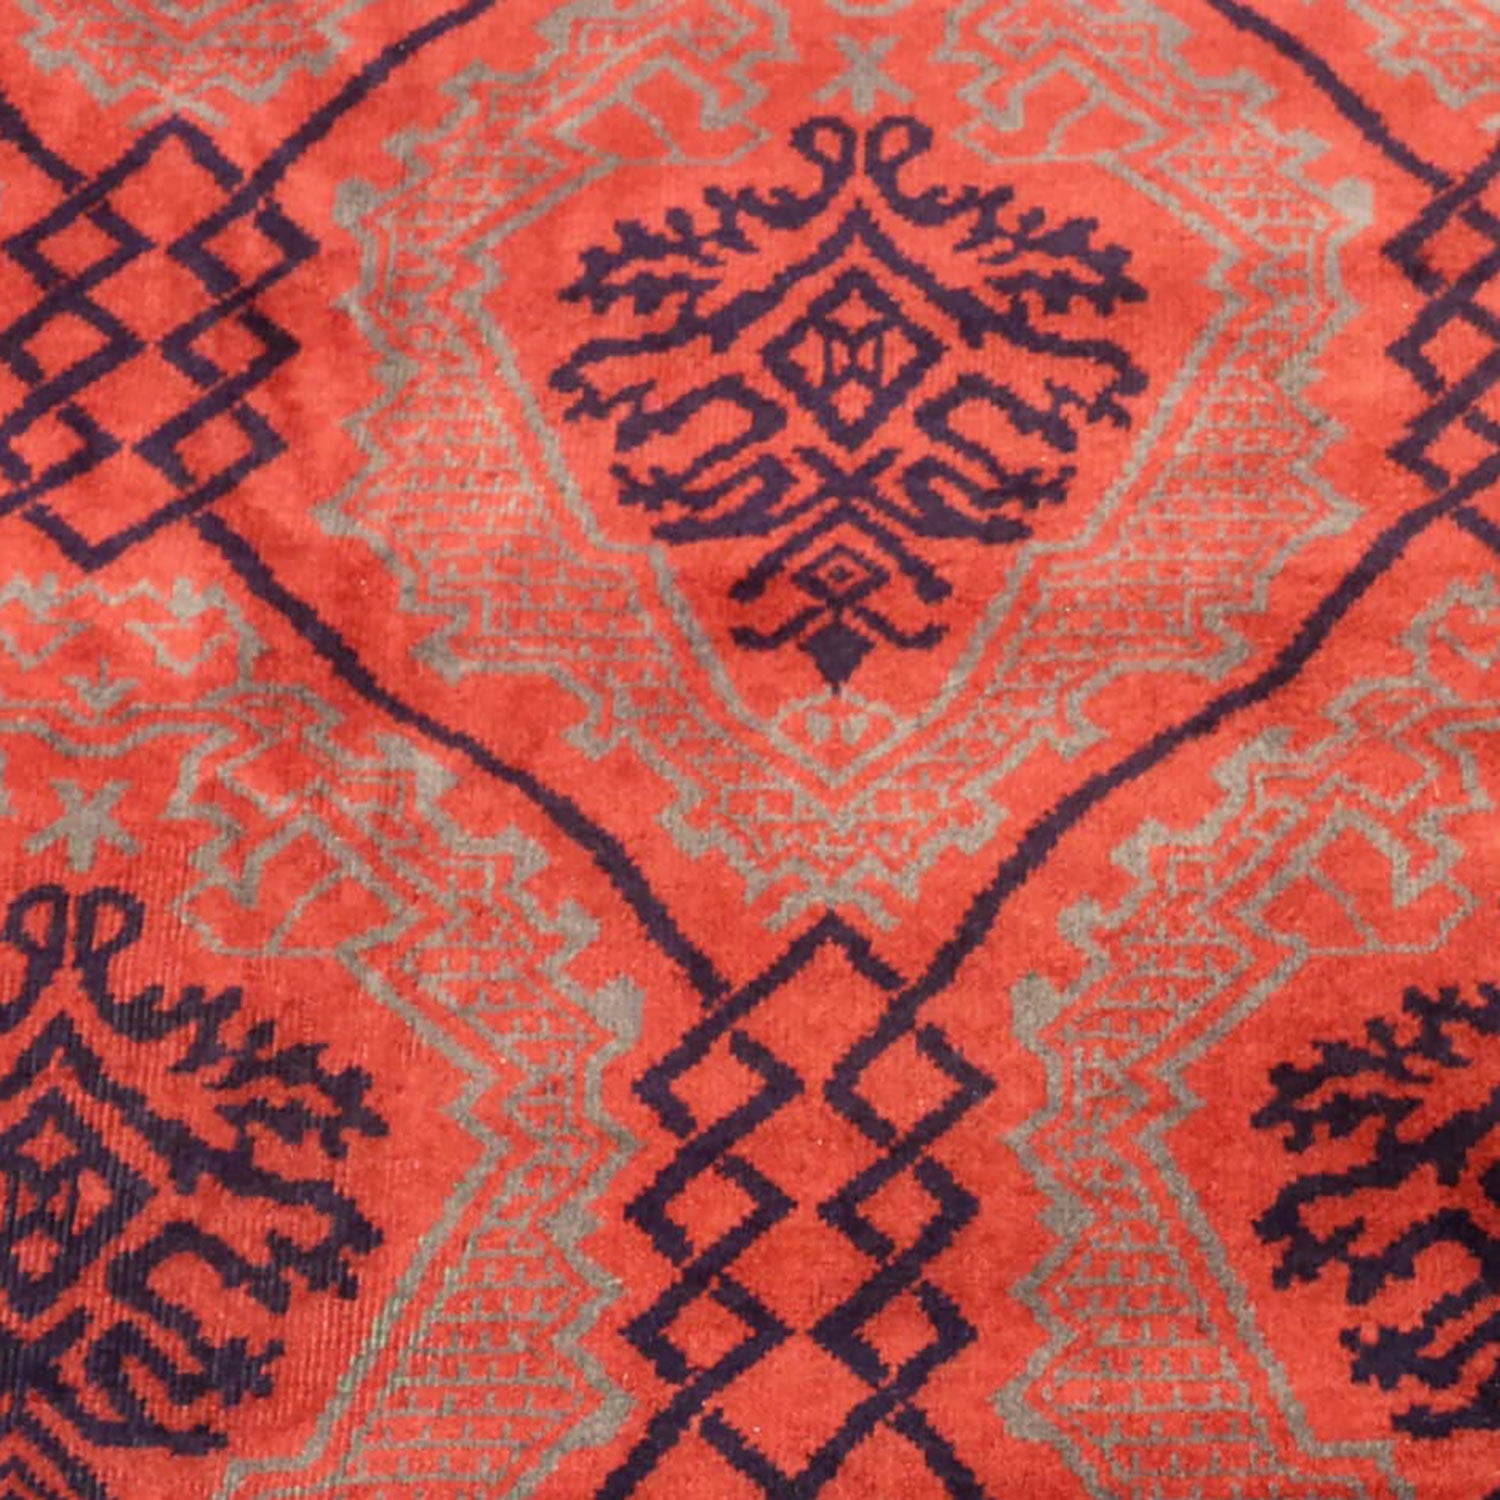 Vibrant Oriental-inspired carpet showcases intricate geometric designs in red and blue.